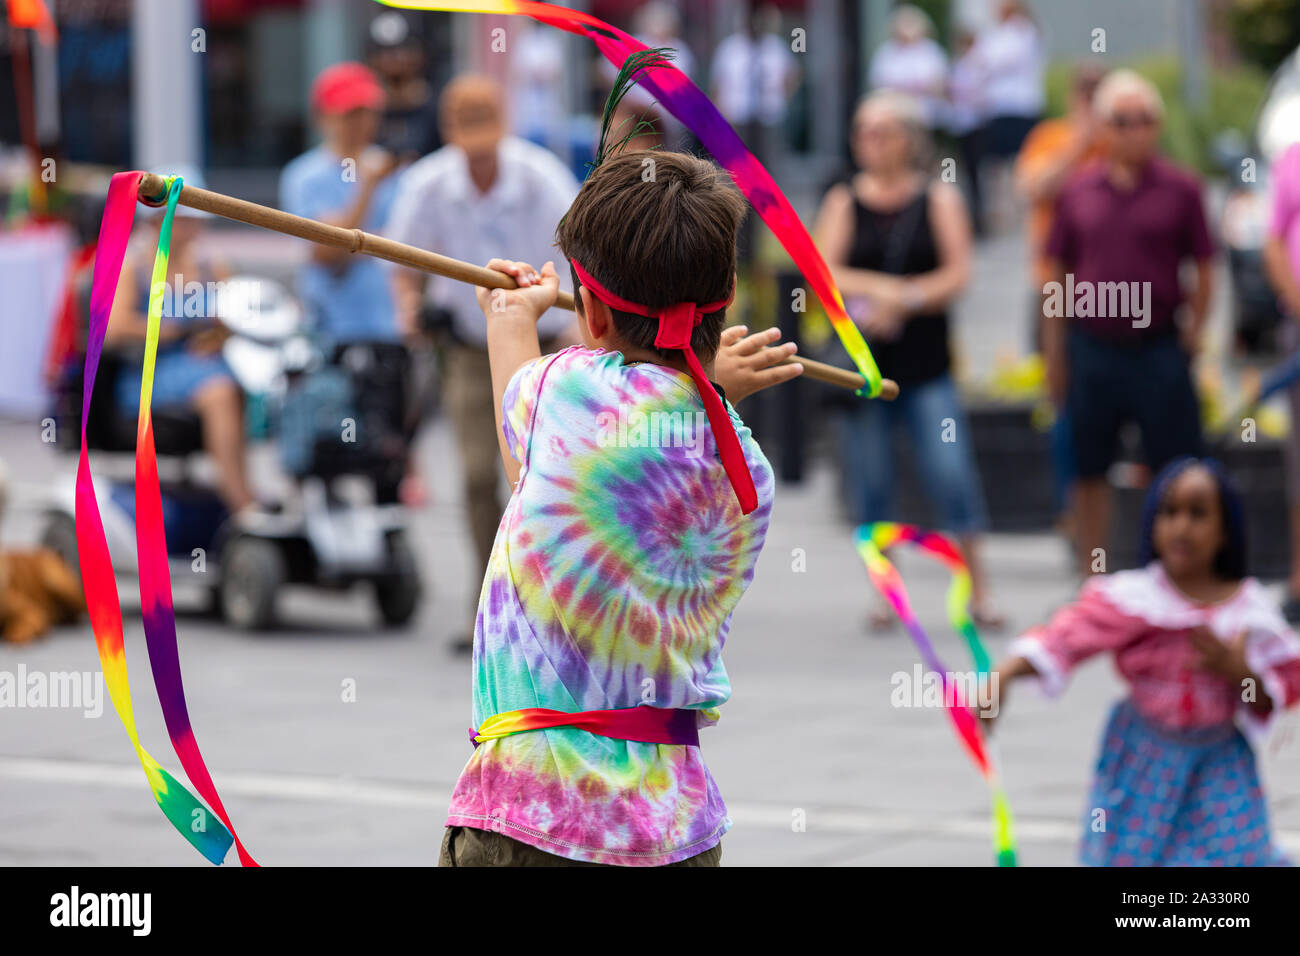 A close up view of a child performing a native dance ritual with vibrant colorful clothes, blurry people are seen in background with copy space. Stock Photo